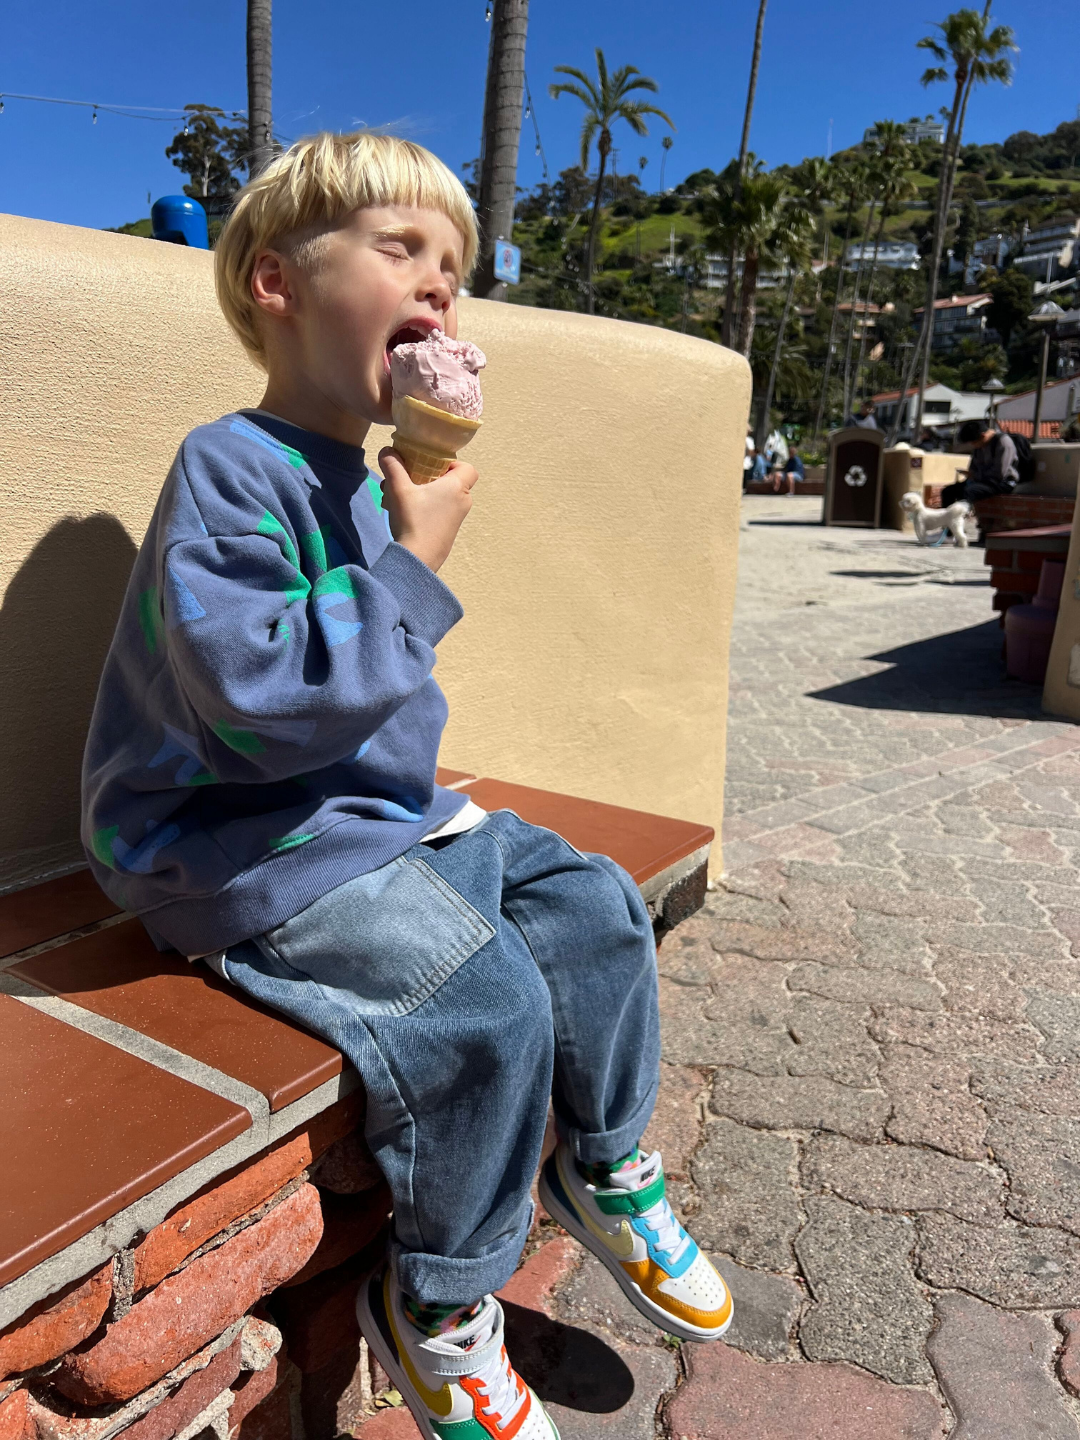 A child wearing the double trouble kids jeans in medium blue denim with lighter blue patch pockets. They have short blond hair, and are wearing a blue sweatshirt and white sneakers with colorful trim, eating an ice cream cone on an outdoor bench with blue sky and palm trees.